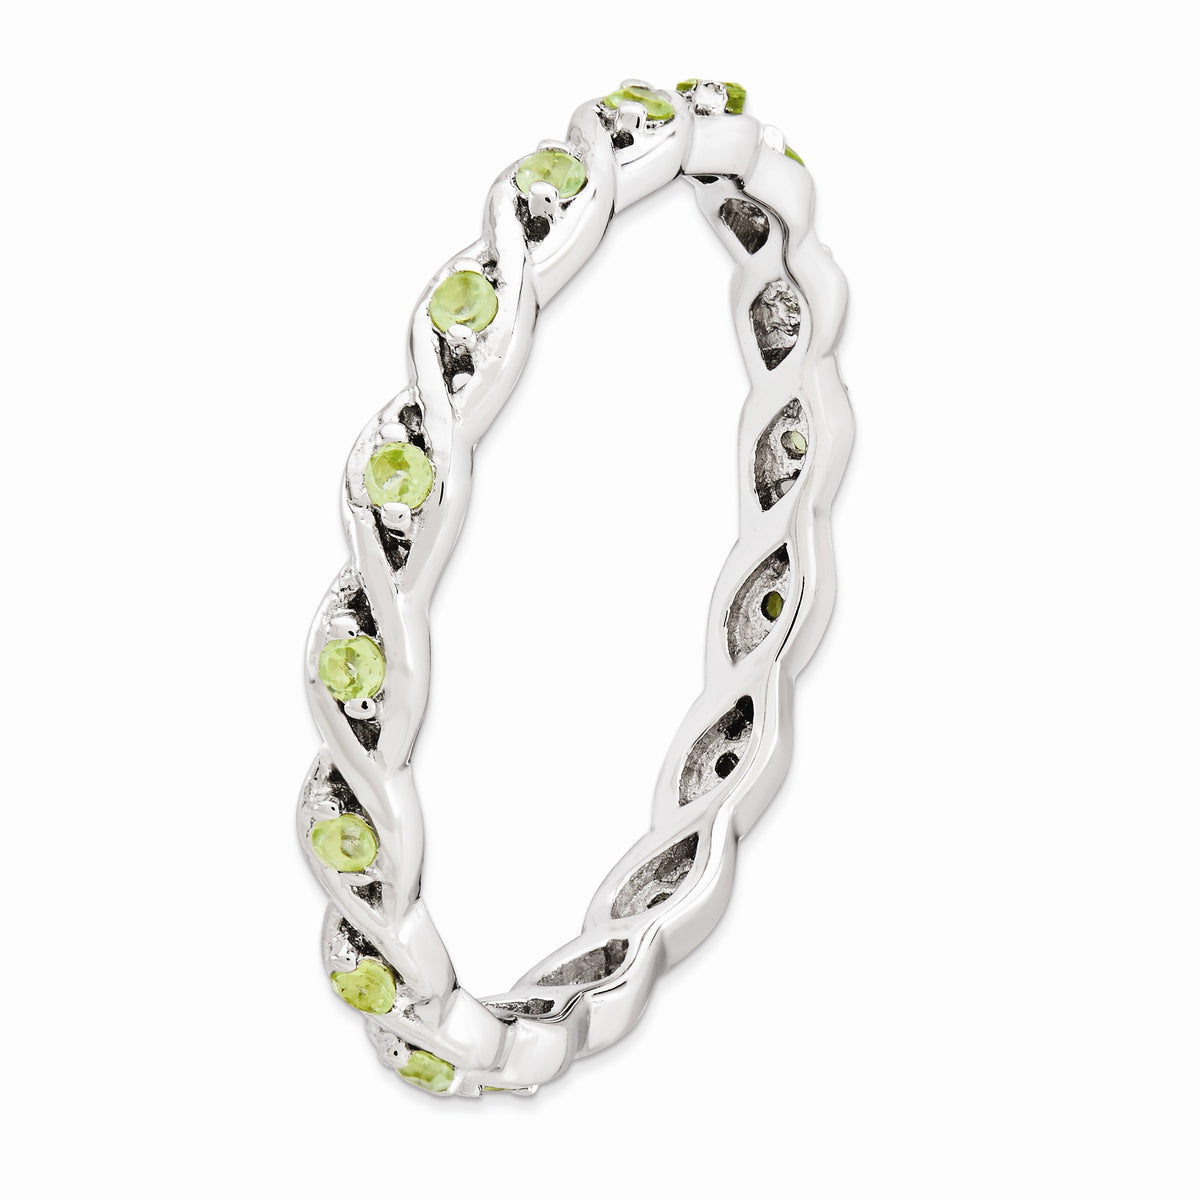 Alternate view of the 2.5mm Rhodium Plated Sterling Silver Stackable Peridot Twist Band by The Black Bow Jewelry Co.